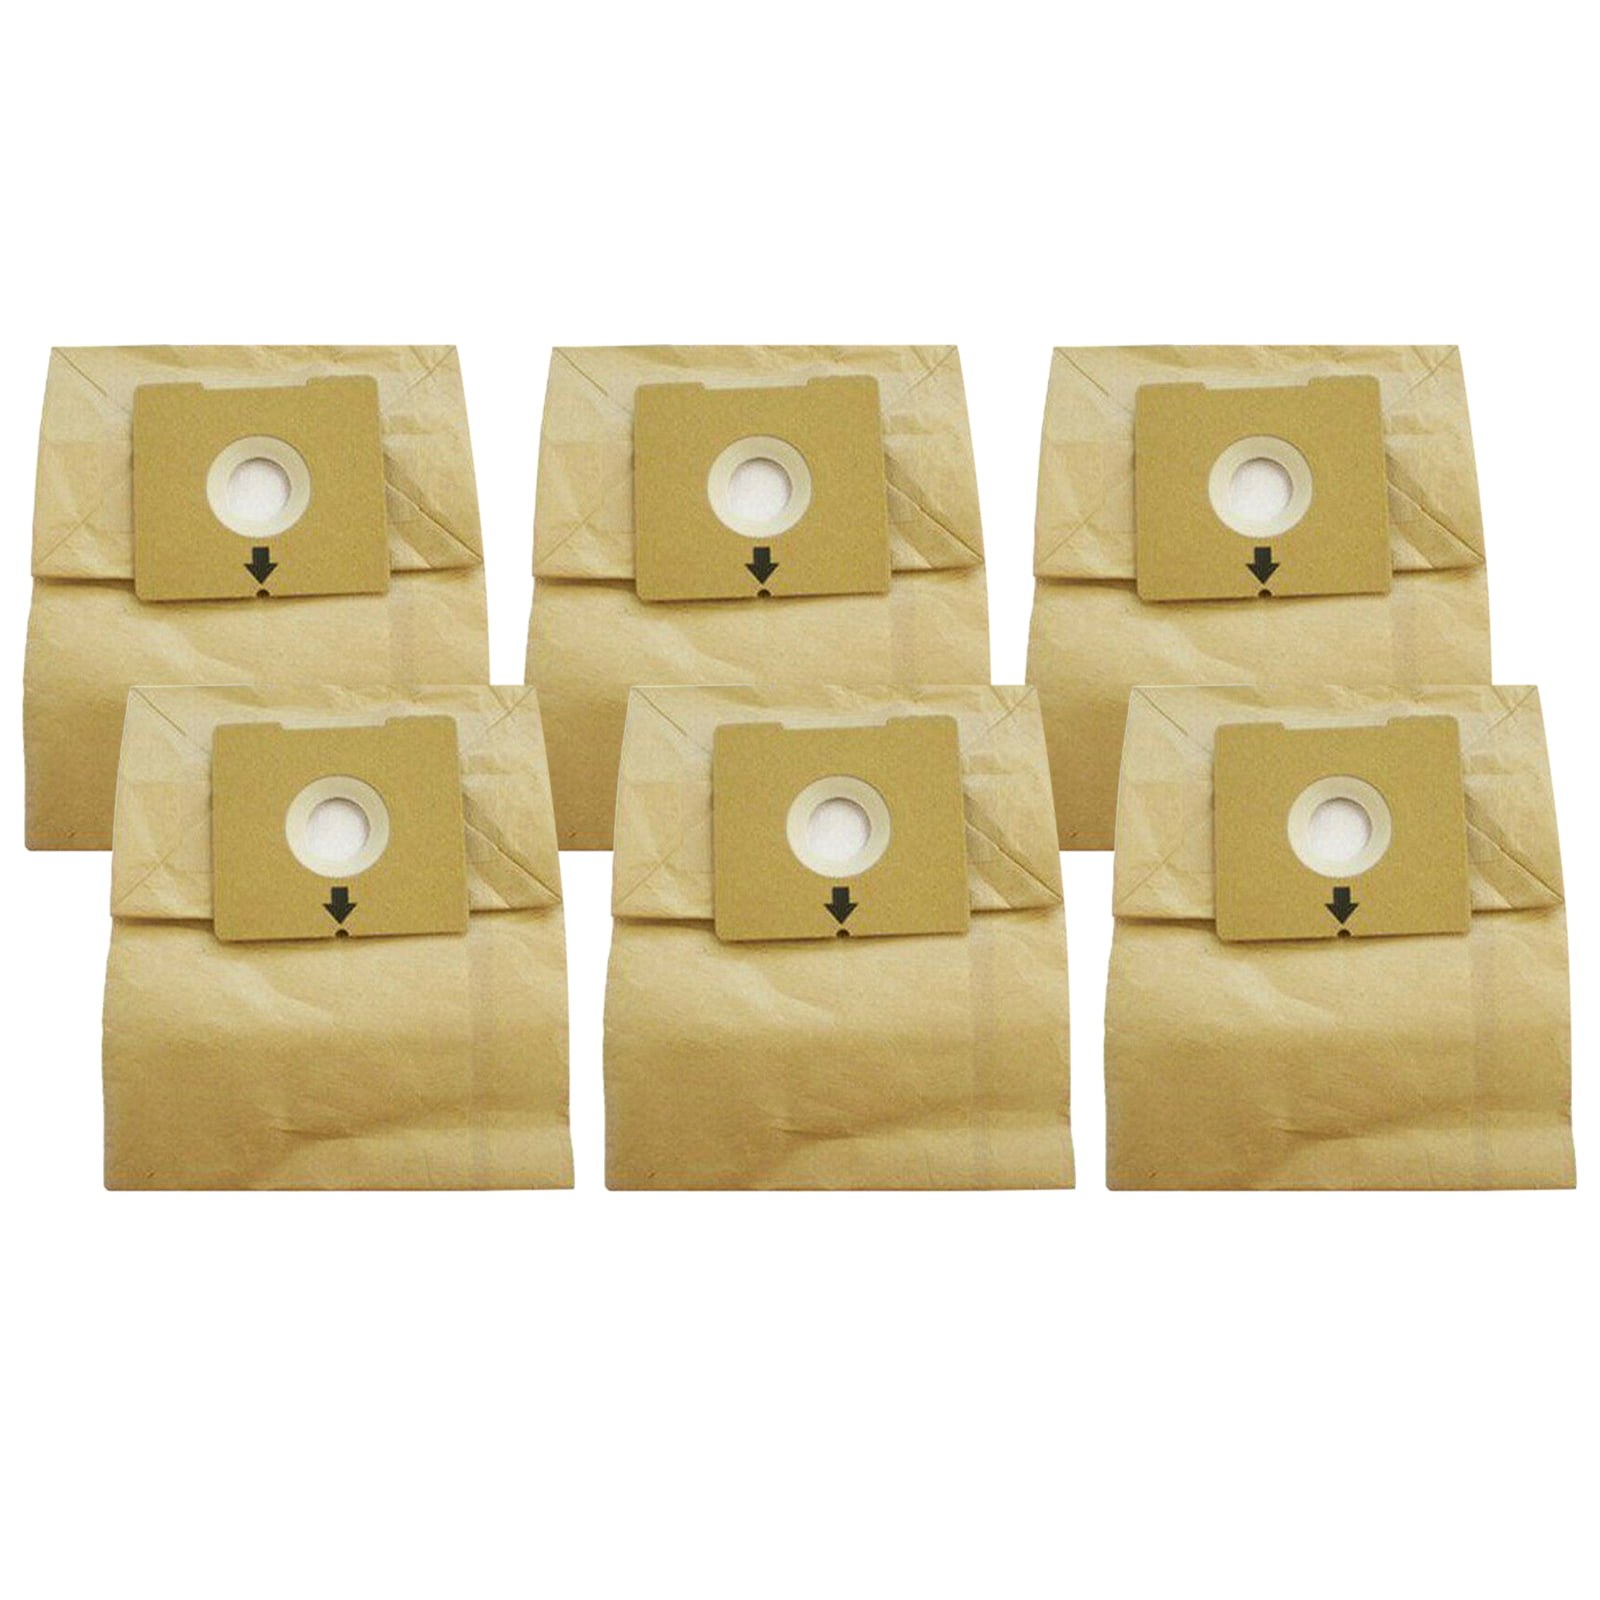 Replacement Micro Filtration Vacuum Cleaner Dust Bags for BISSELL ZING 4122 